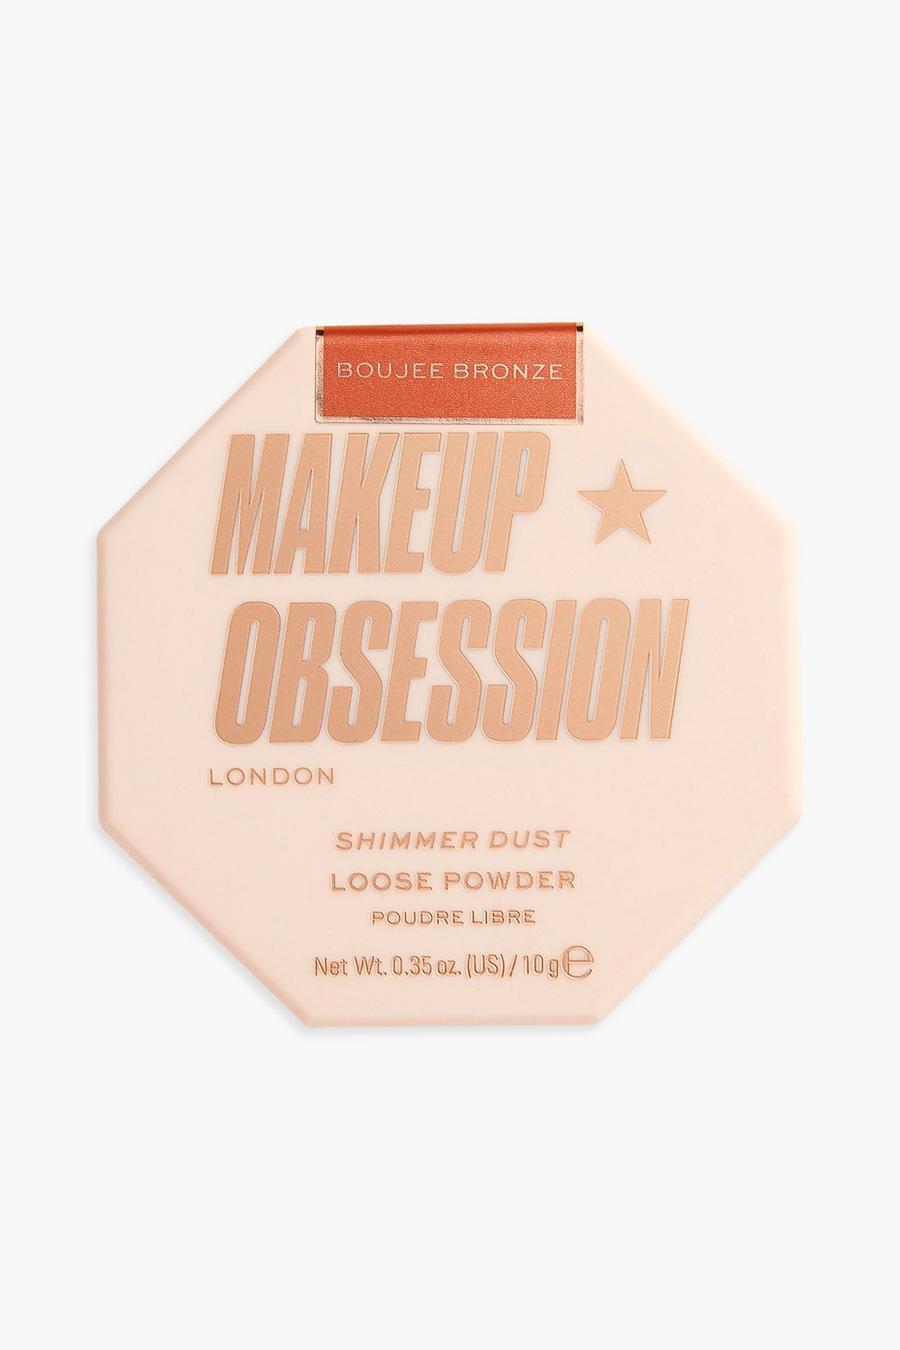 Makeup Obsession Shimmer Dust Boujee Bronze - Polvere illuminante, Multi image number 1